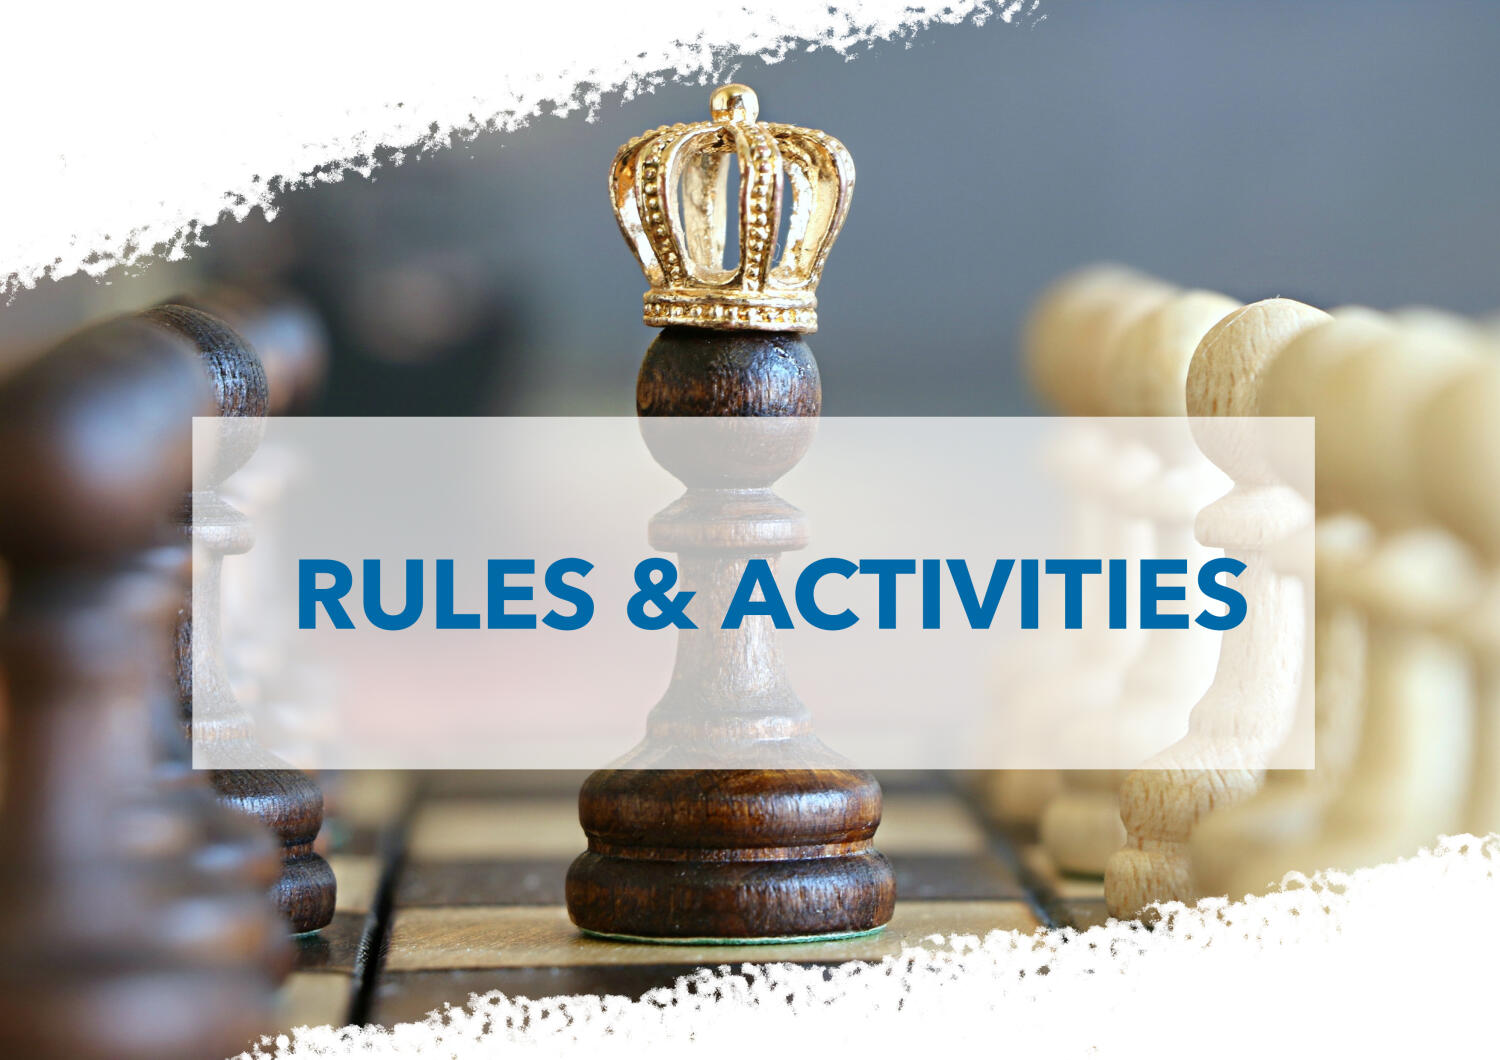 Rules and activities